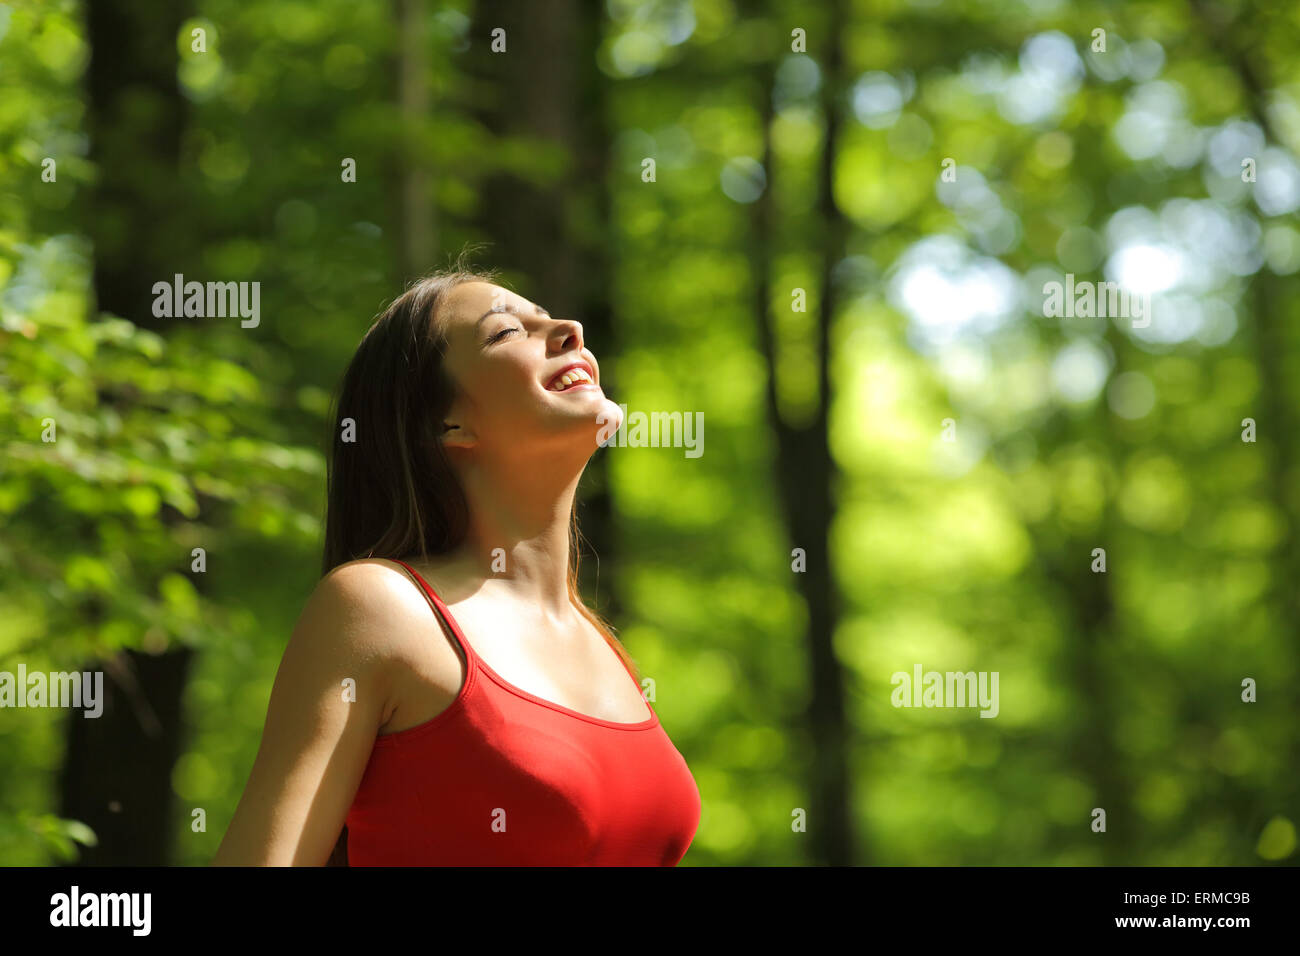 Woman breathing fresh air in a green forest in summer wearing a red shirt Stock Photo